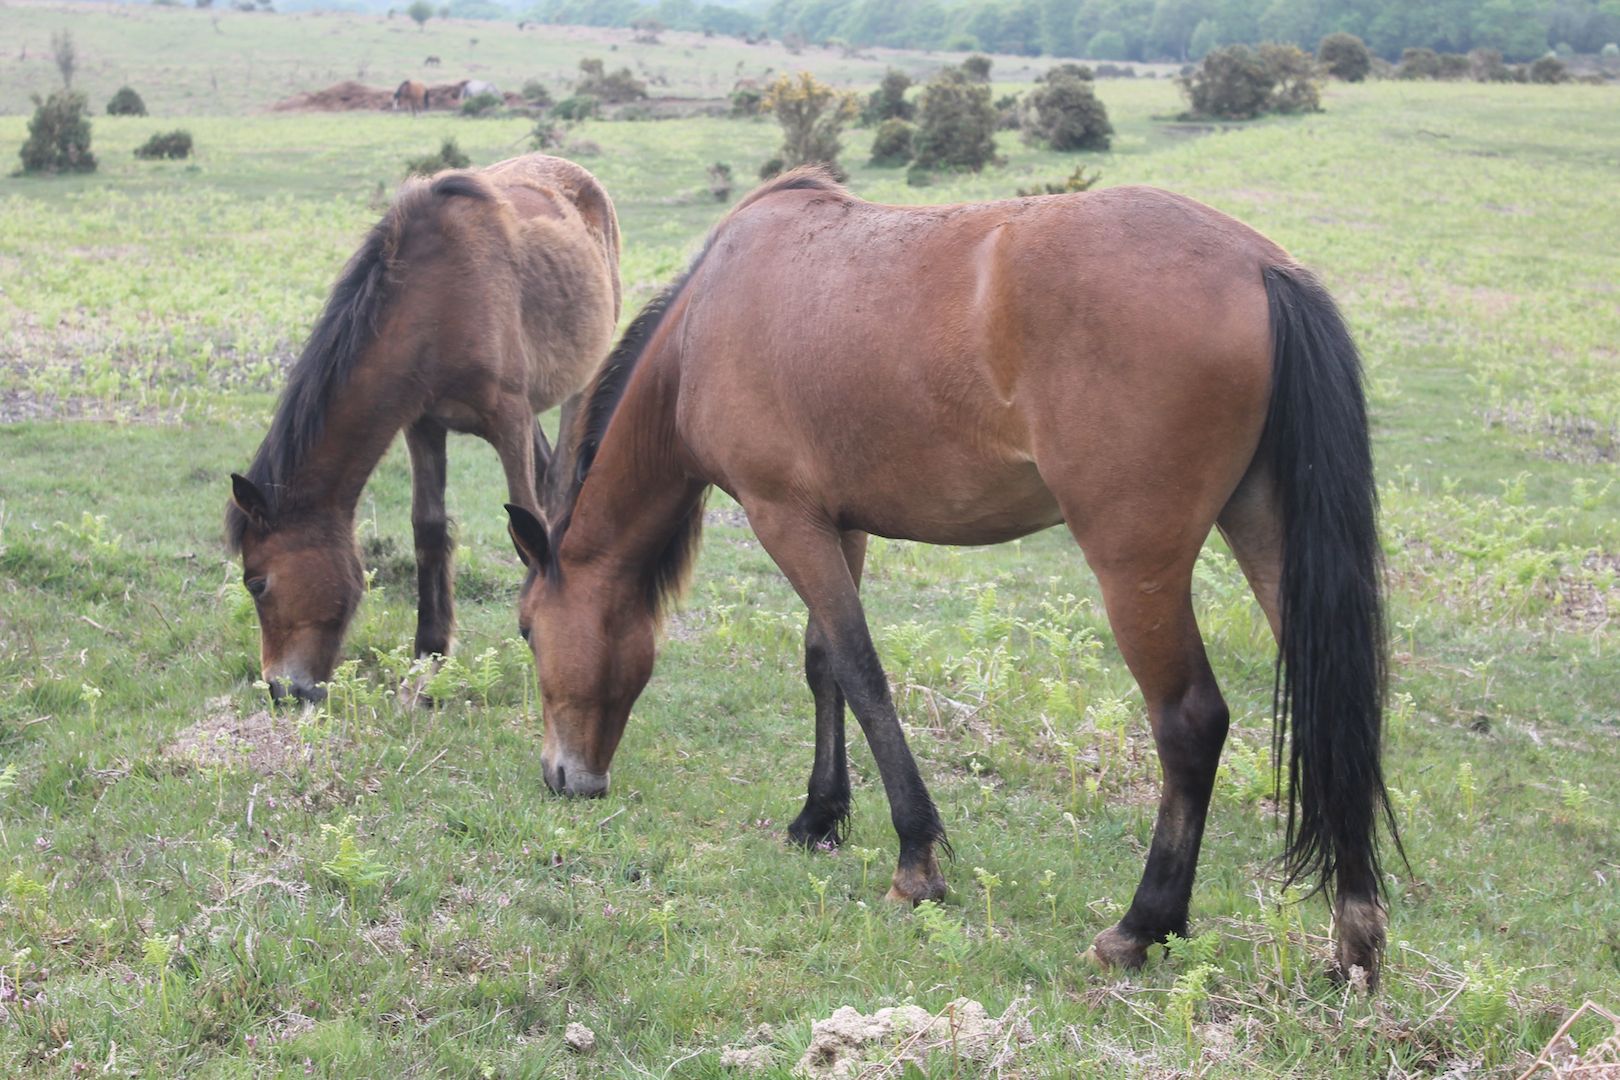 The New Forest pony has an ancient lineage, including two endangered Spanish pony breeds, the Asturcón and Pottok